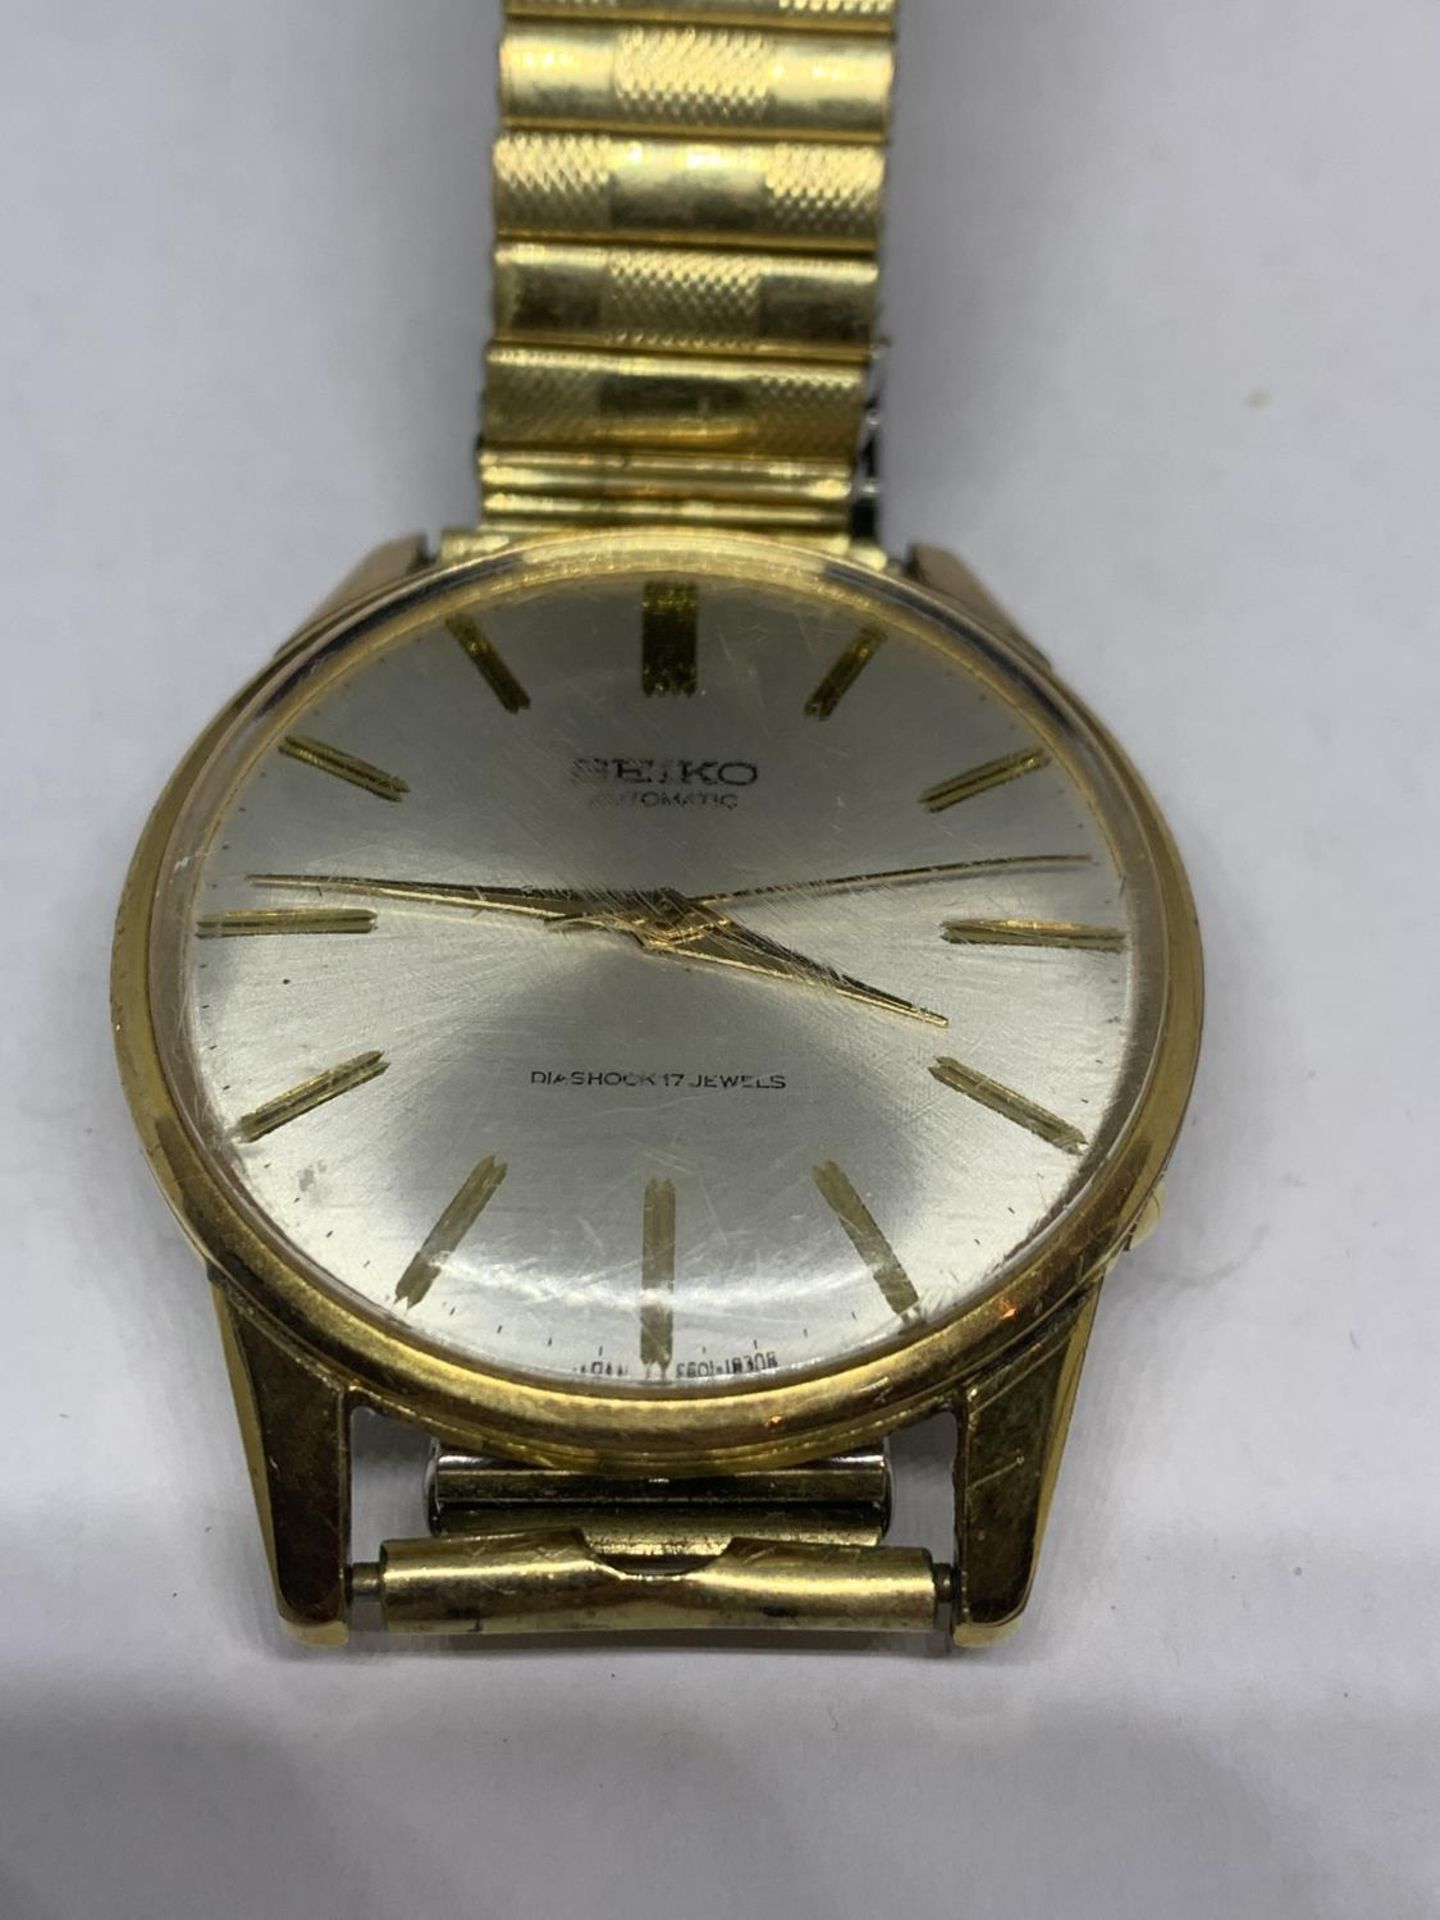 A VINTAGE YELLOW METAL SEIKO AUTOMATIC DIASHOCK 17 JEWELS WRISTWATCH SEEN WORKING BUT NO WARRANTY - Image 2 of 3